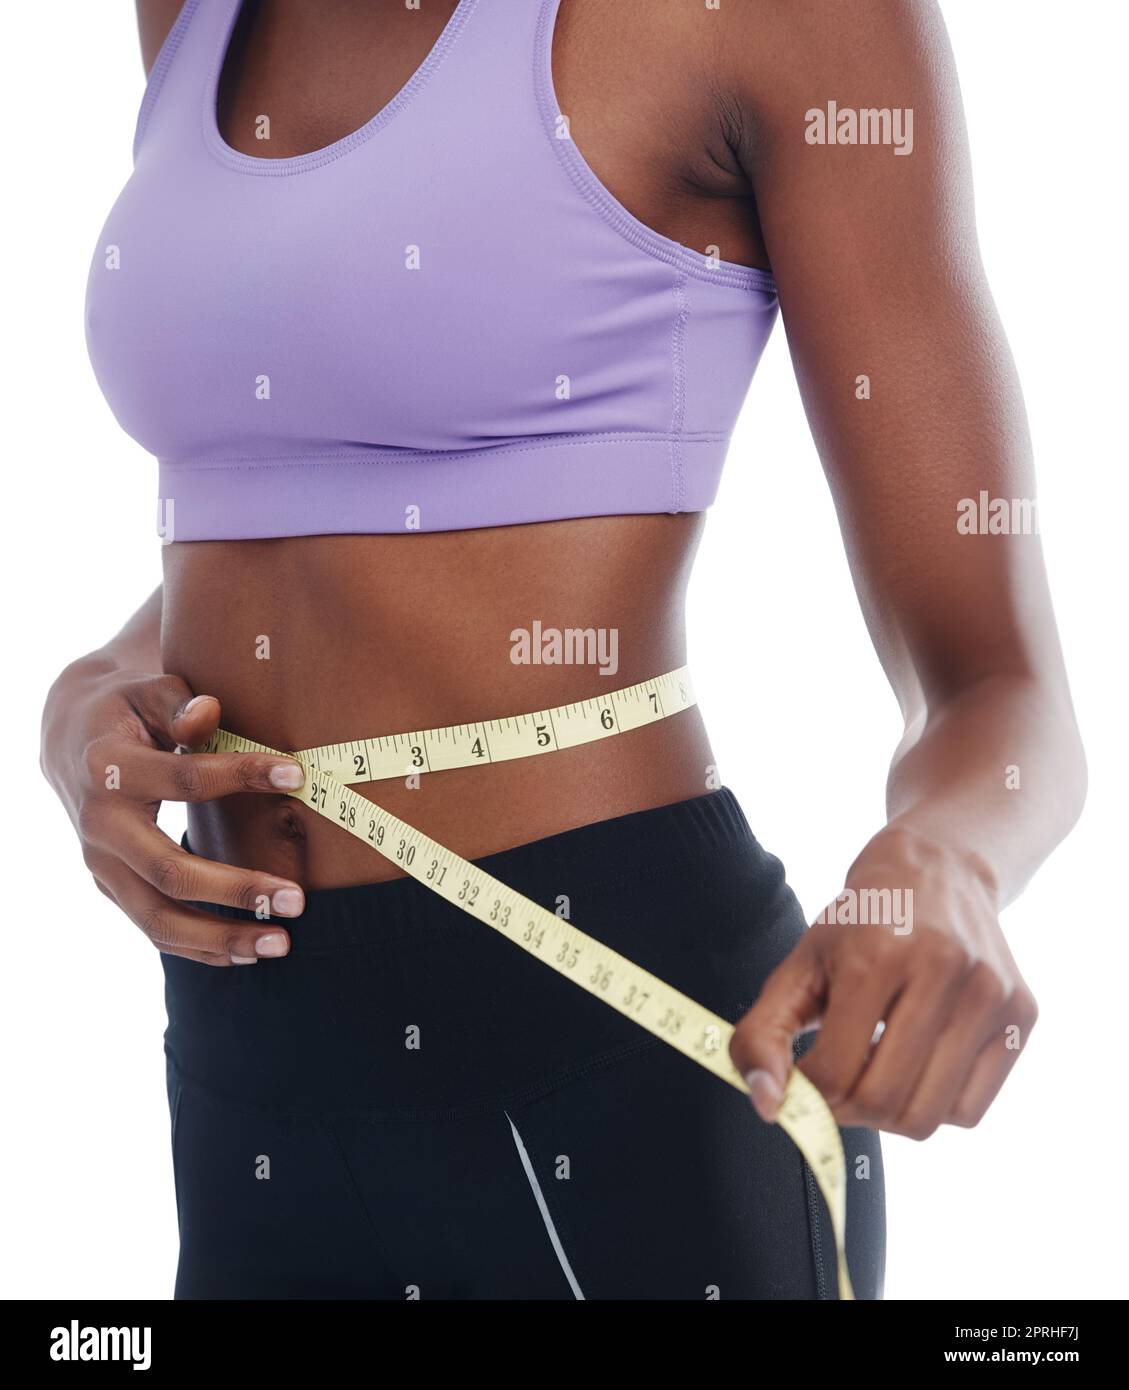 illustration of a female measuring waist with measuring tape Stock